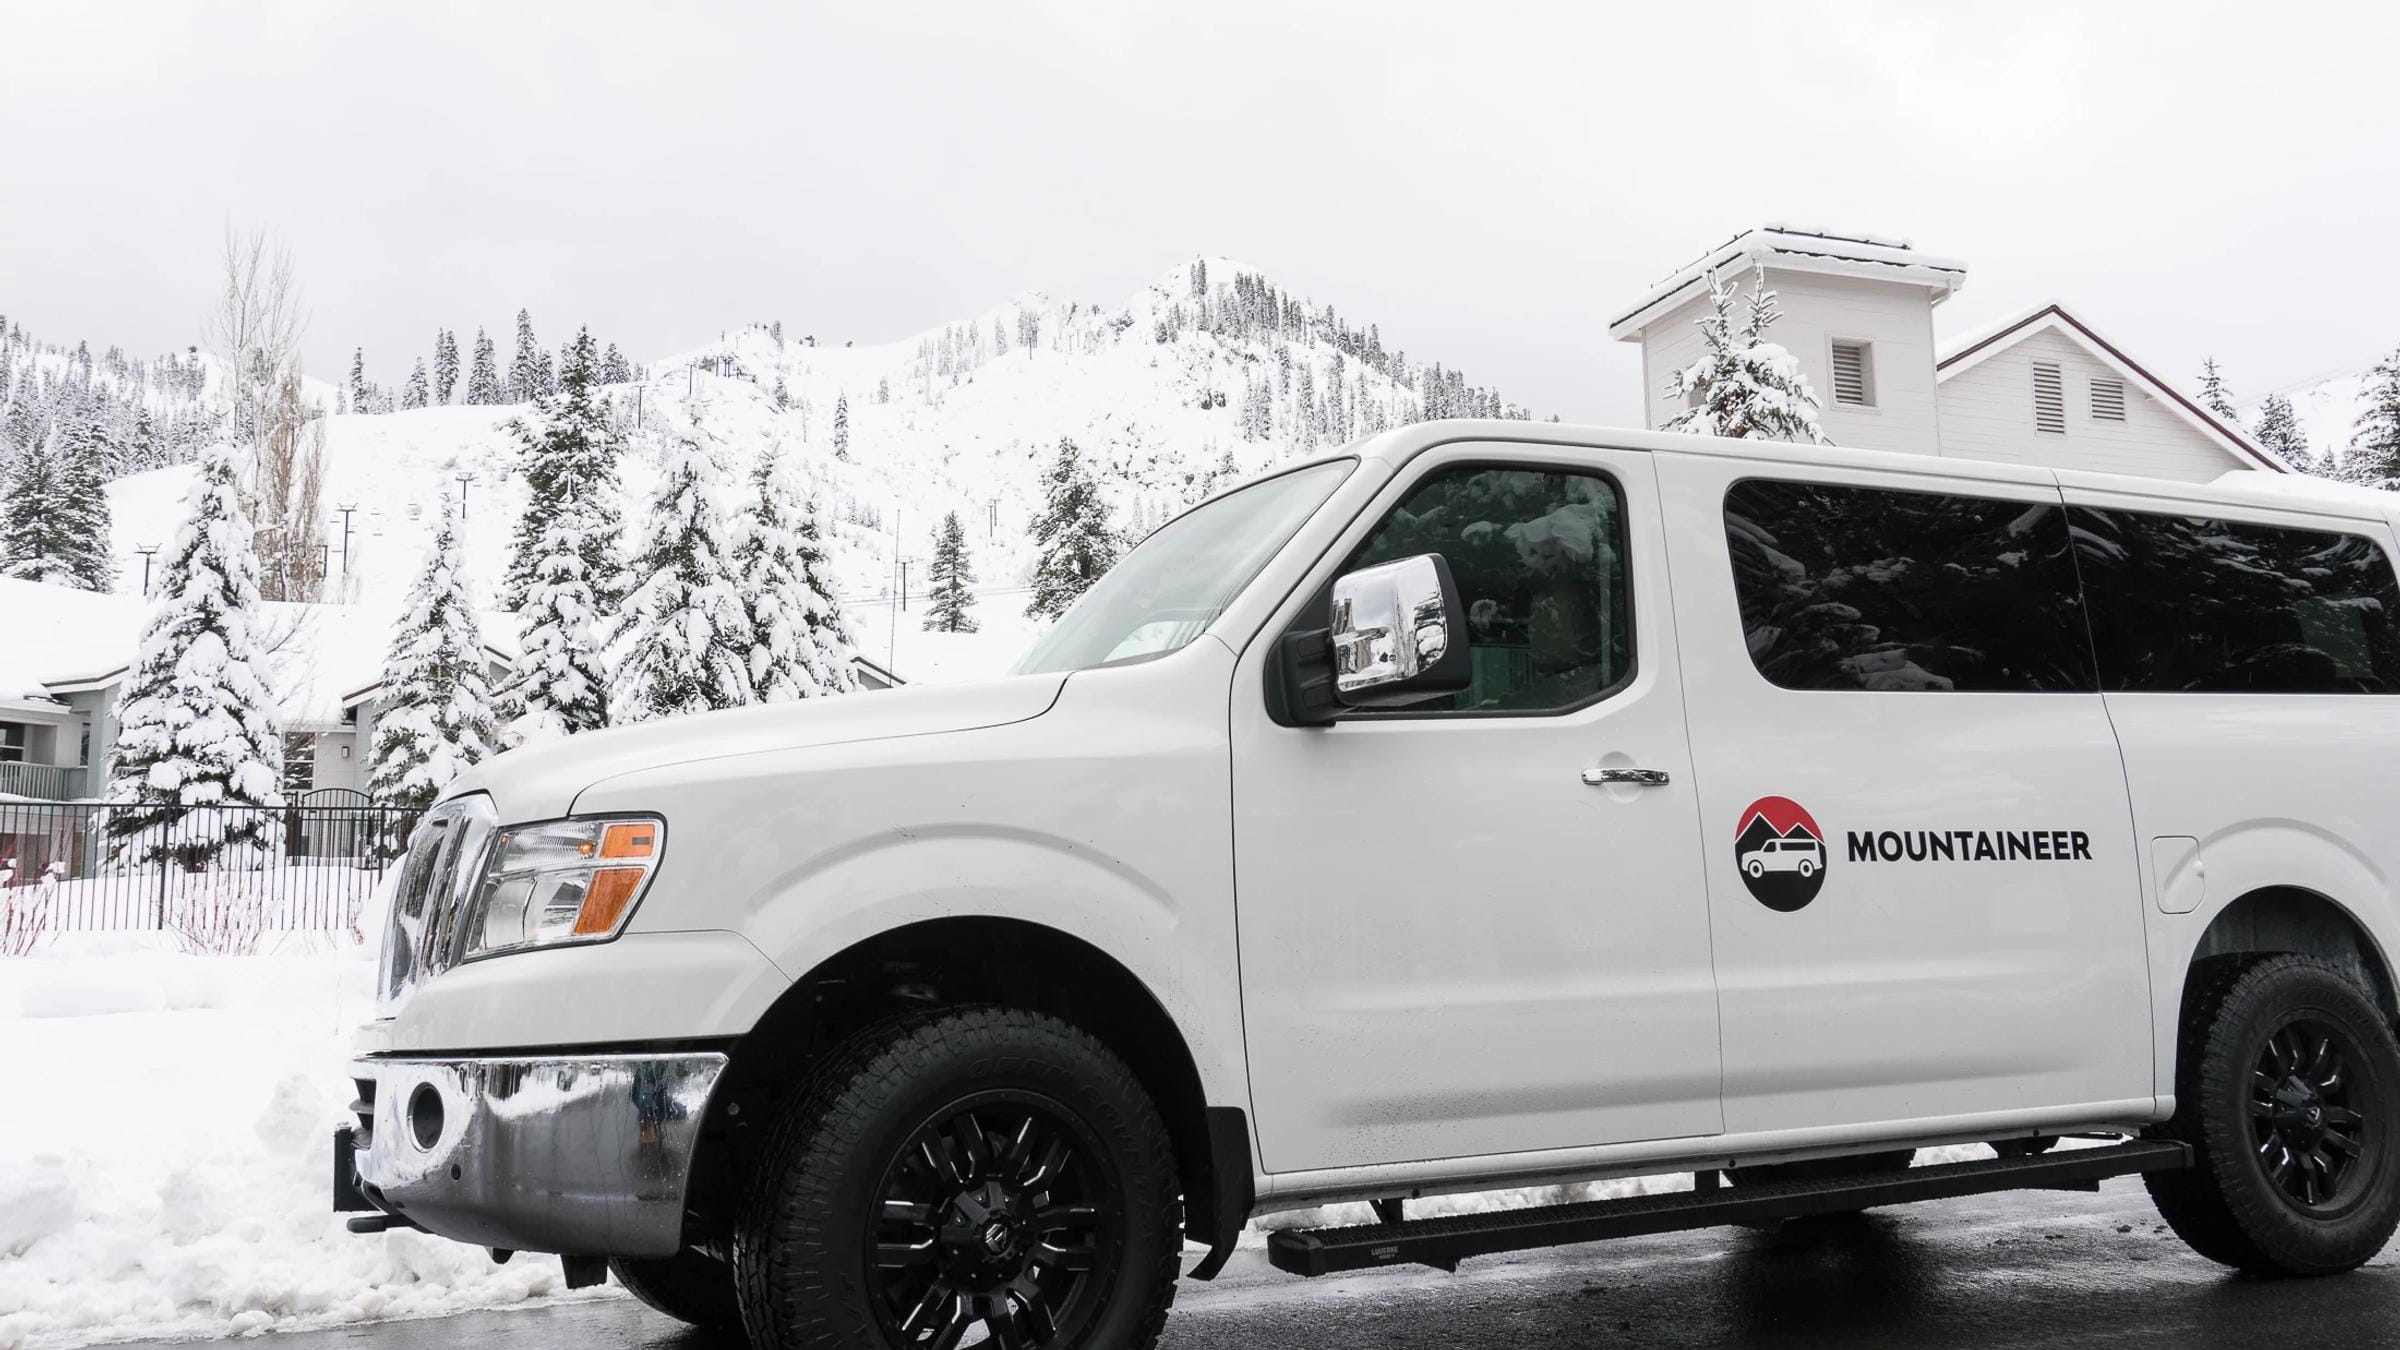 The Mountaineer Shuttle on a snowy day at Squaw Valley